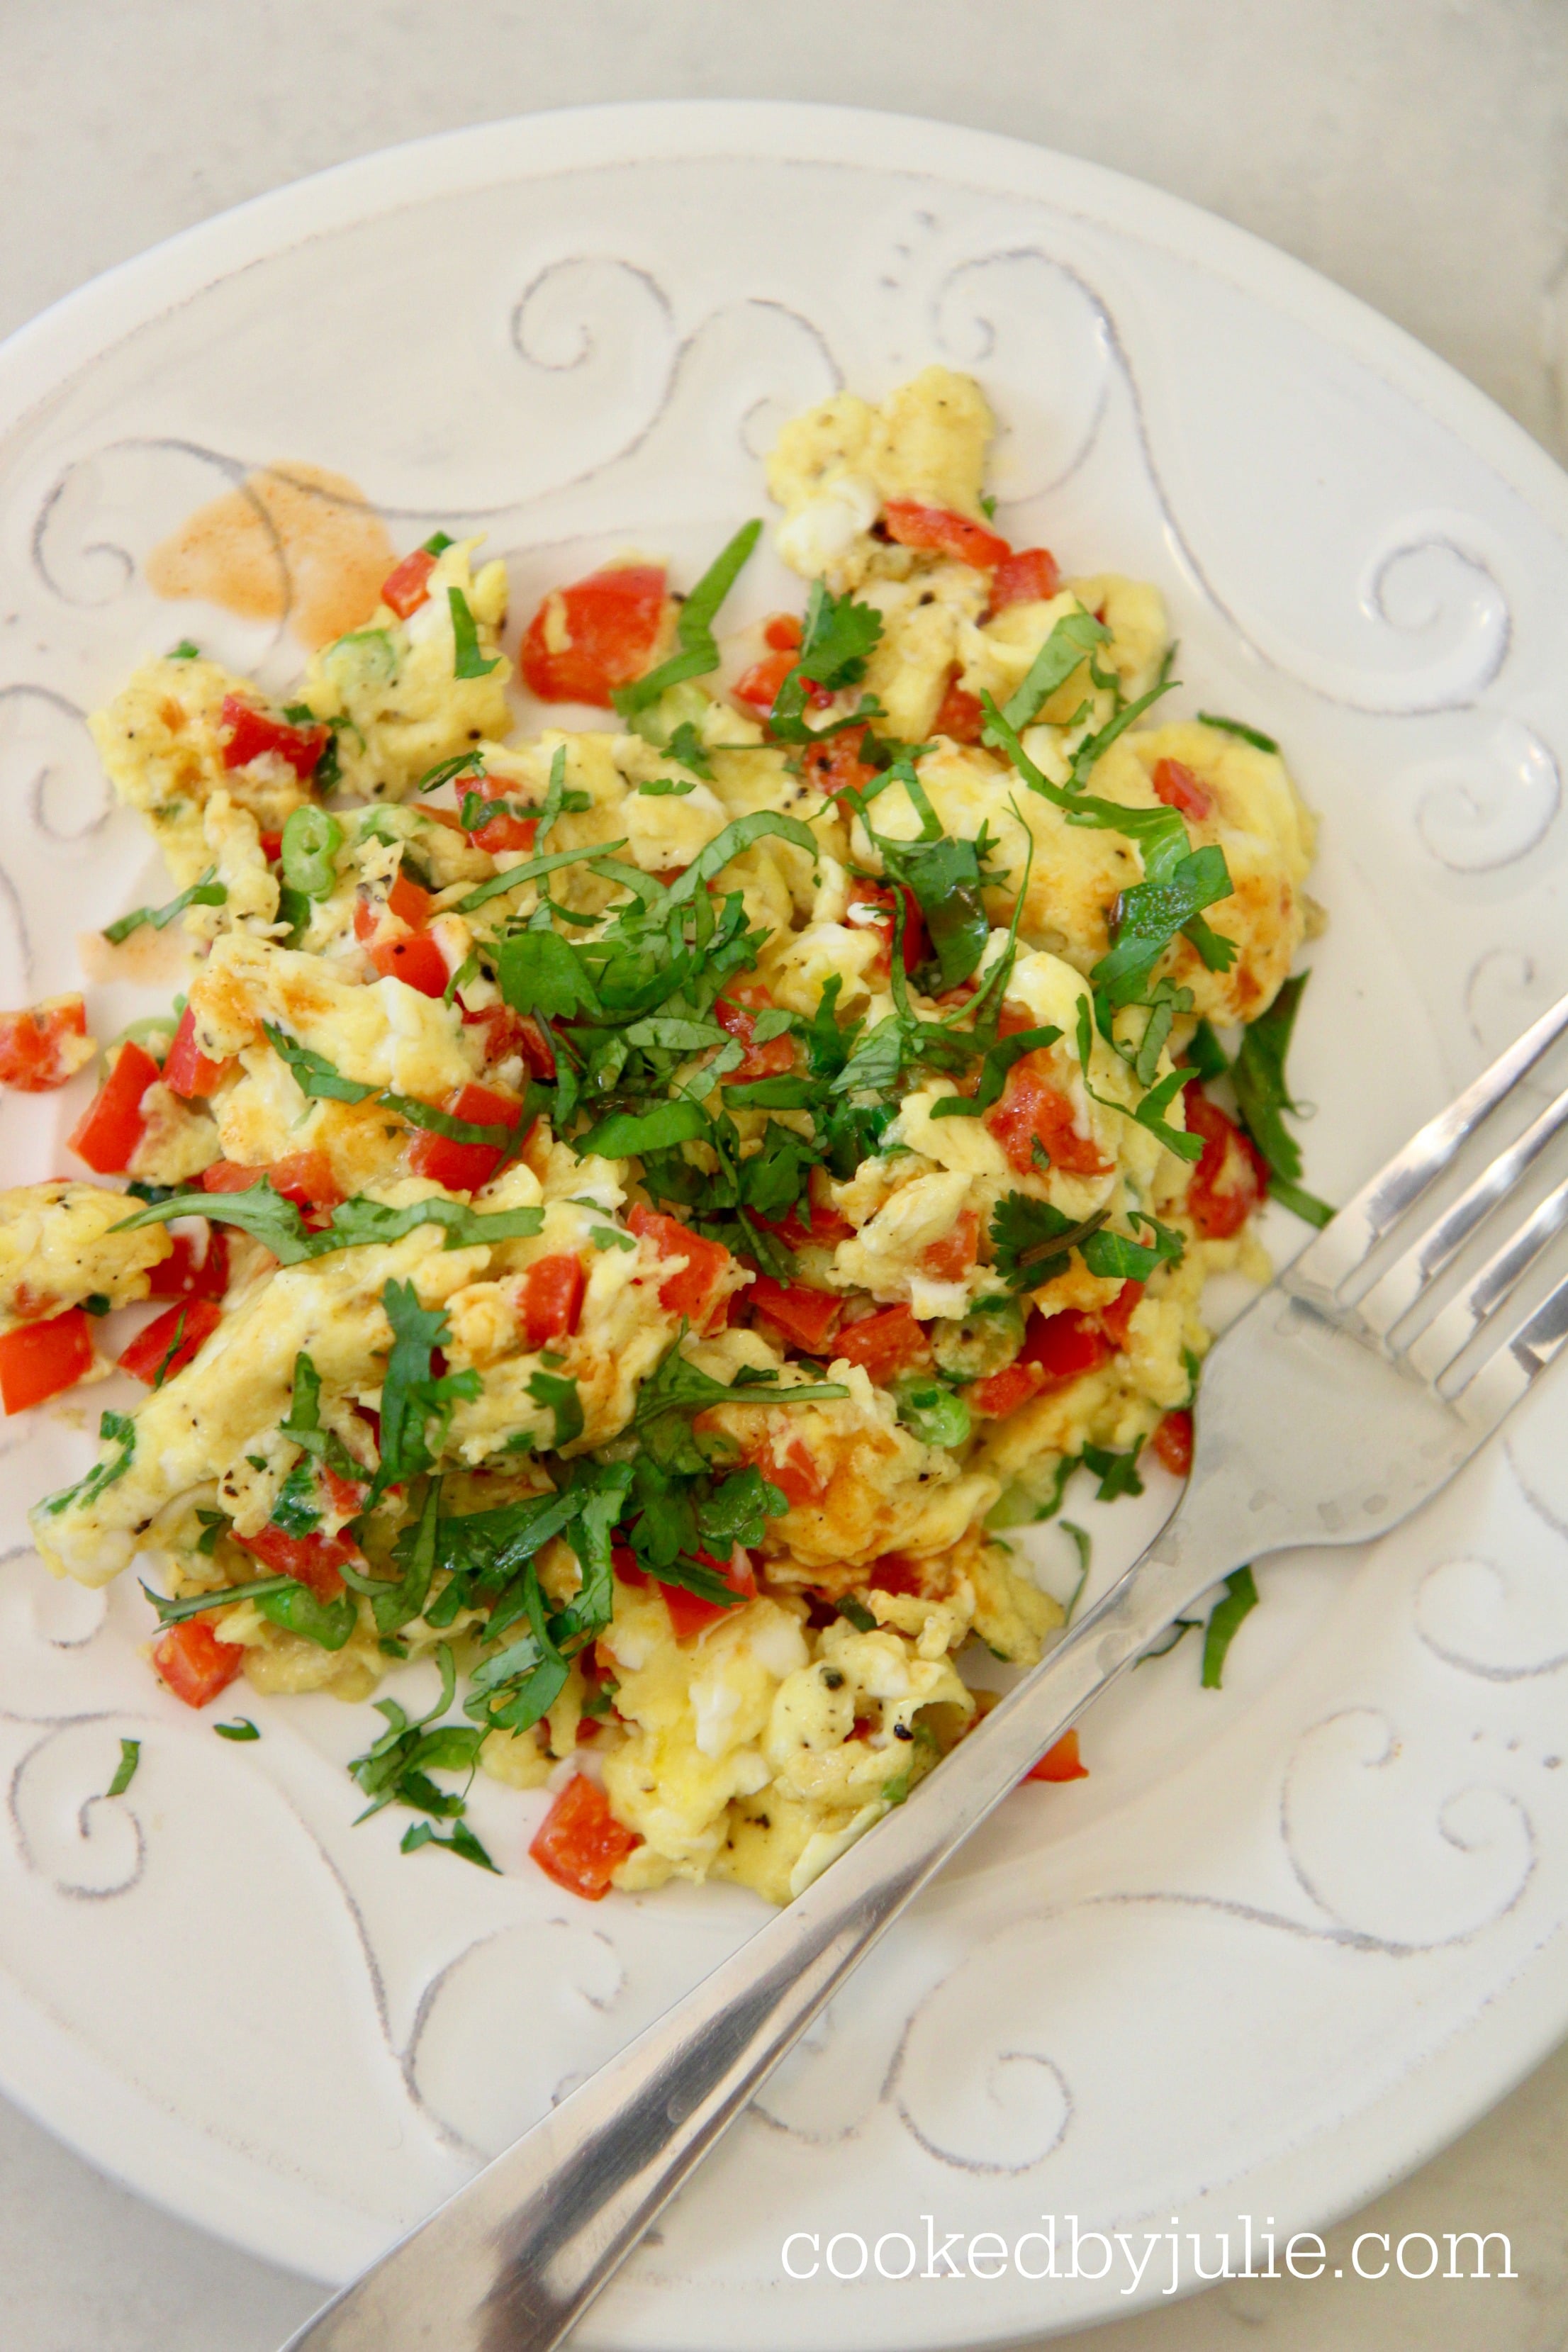 scrambled eggs with onions, peppers, cilantro, and hot sauce.